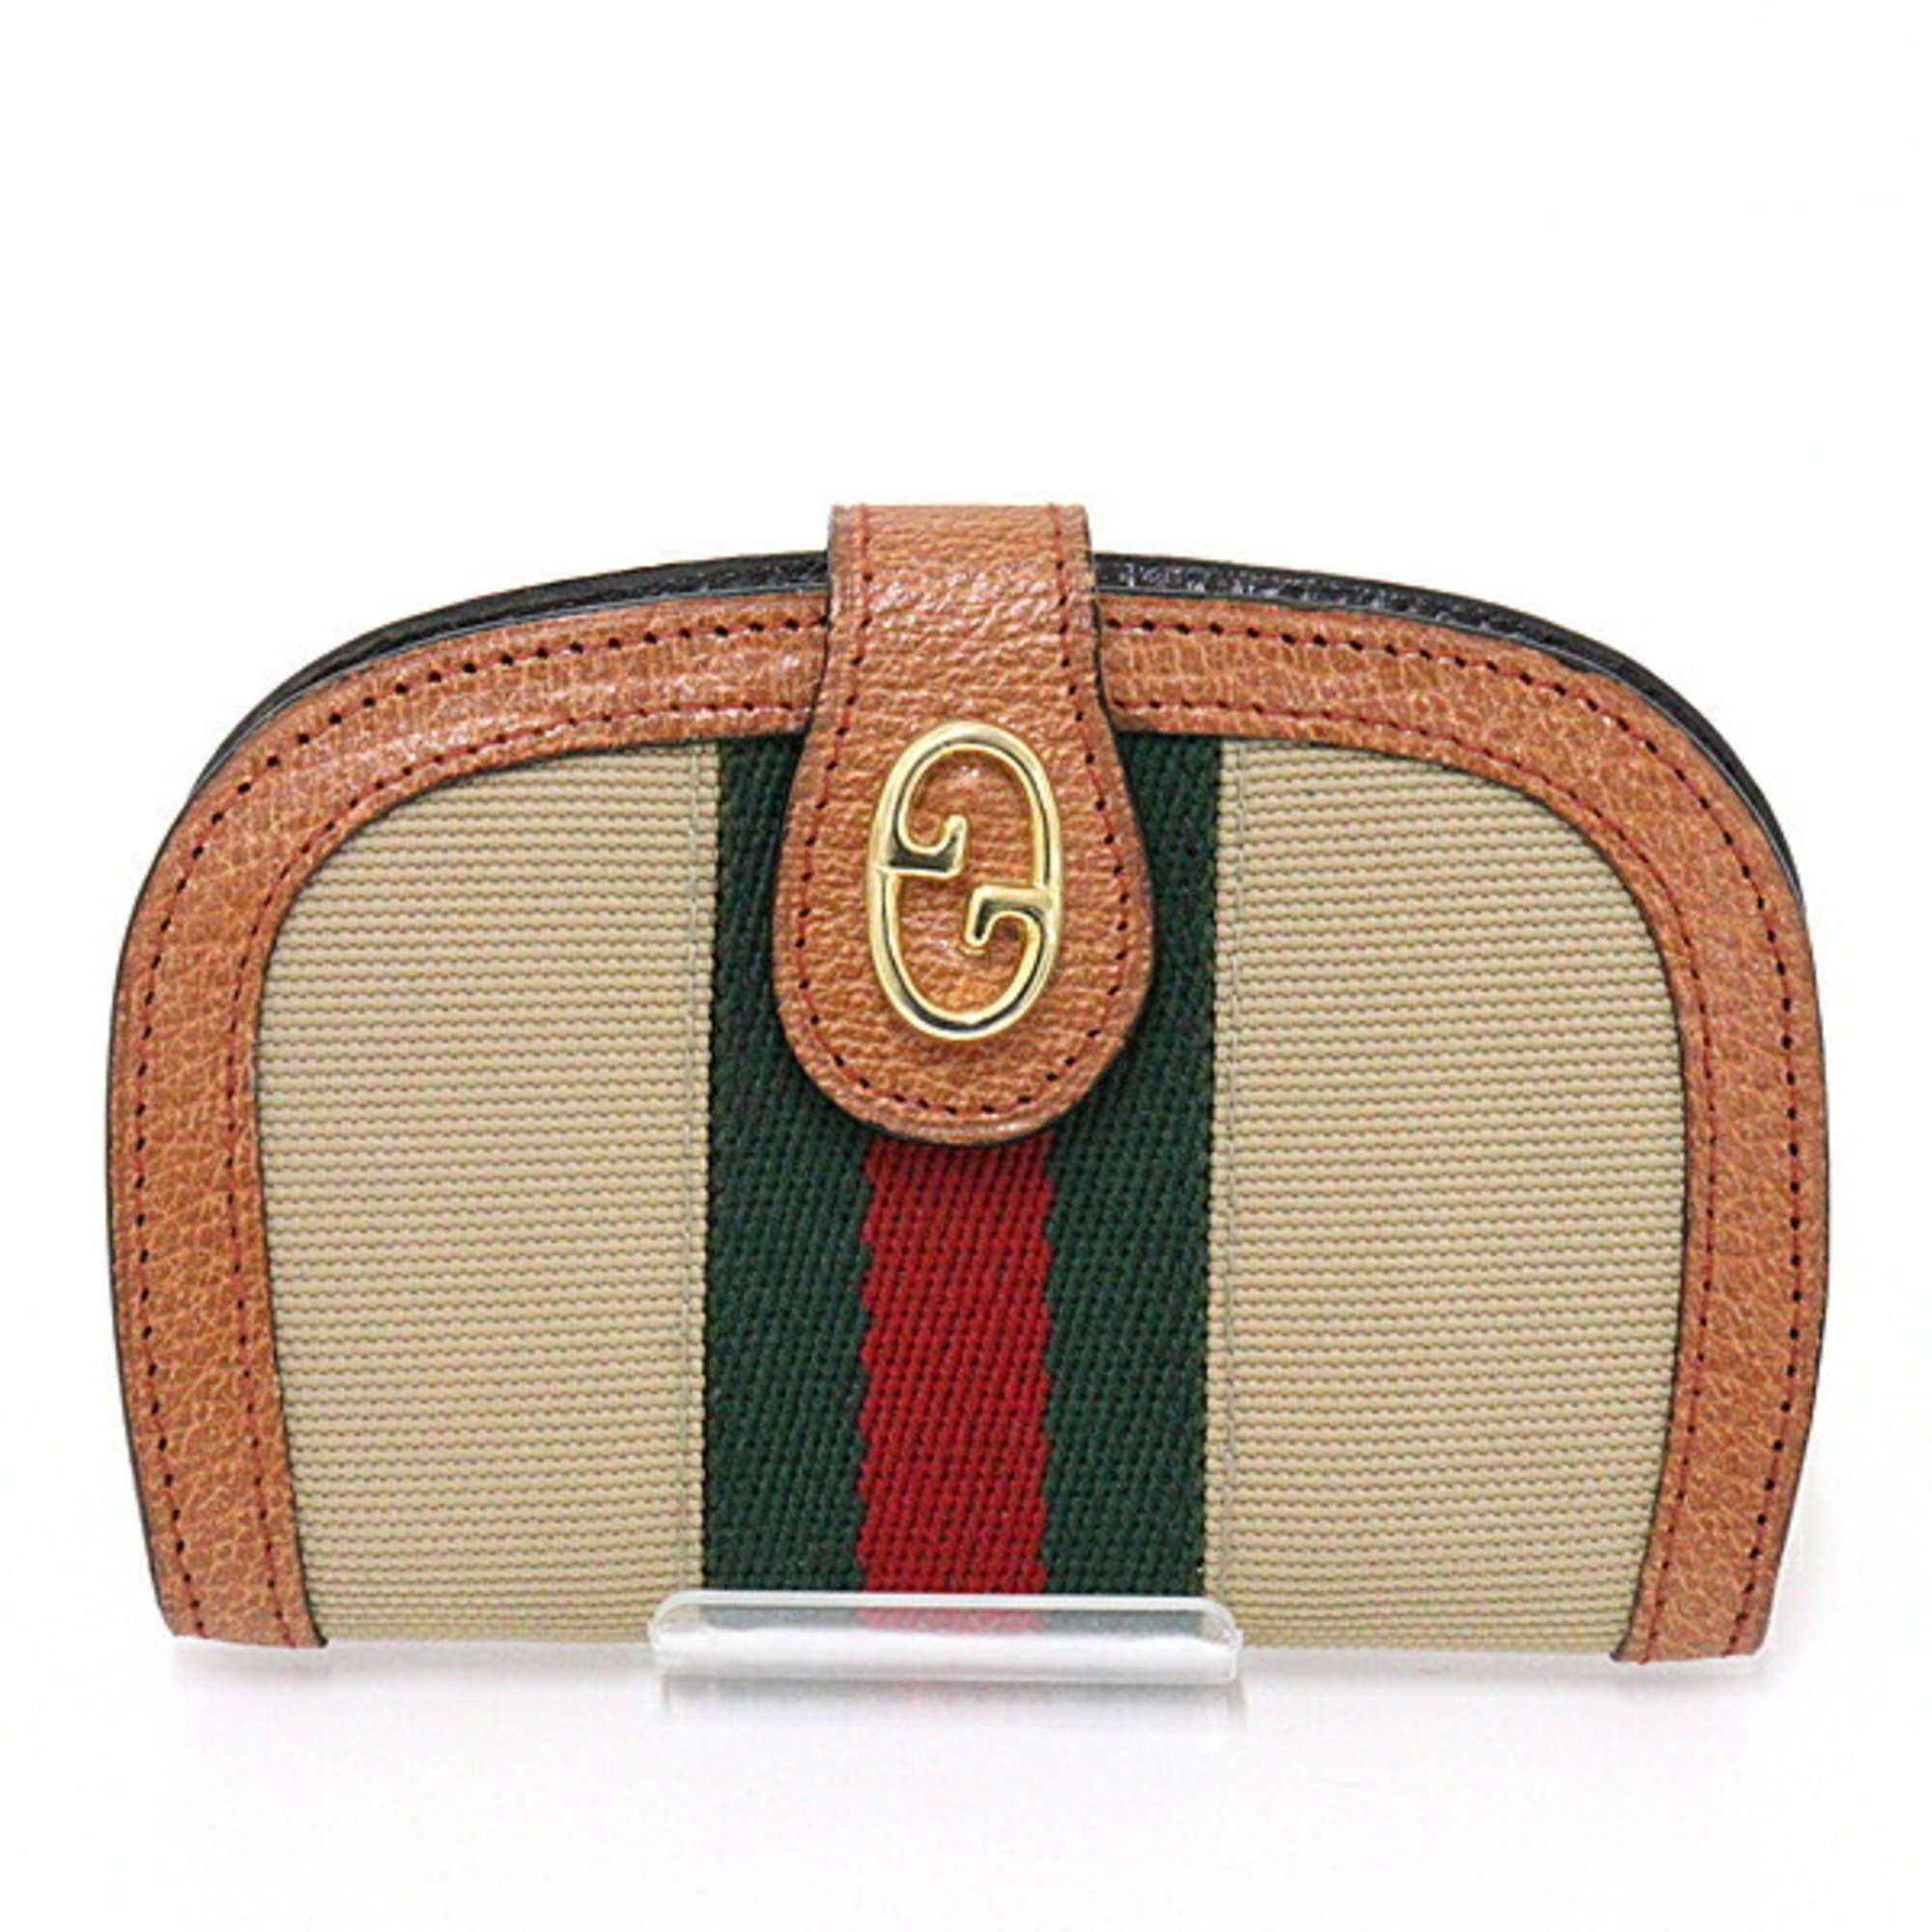 Gucci GUCCI Old Sherry Line Key Case 6 Rows Beige Green/Red/Green Canvas/Leather Web Stripe